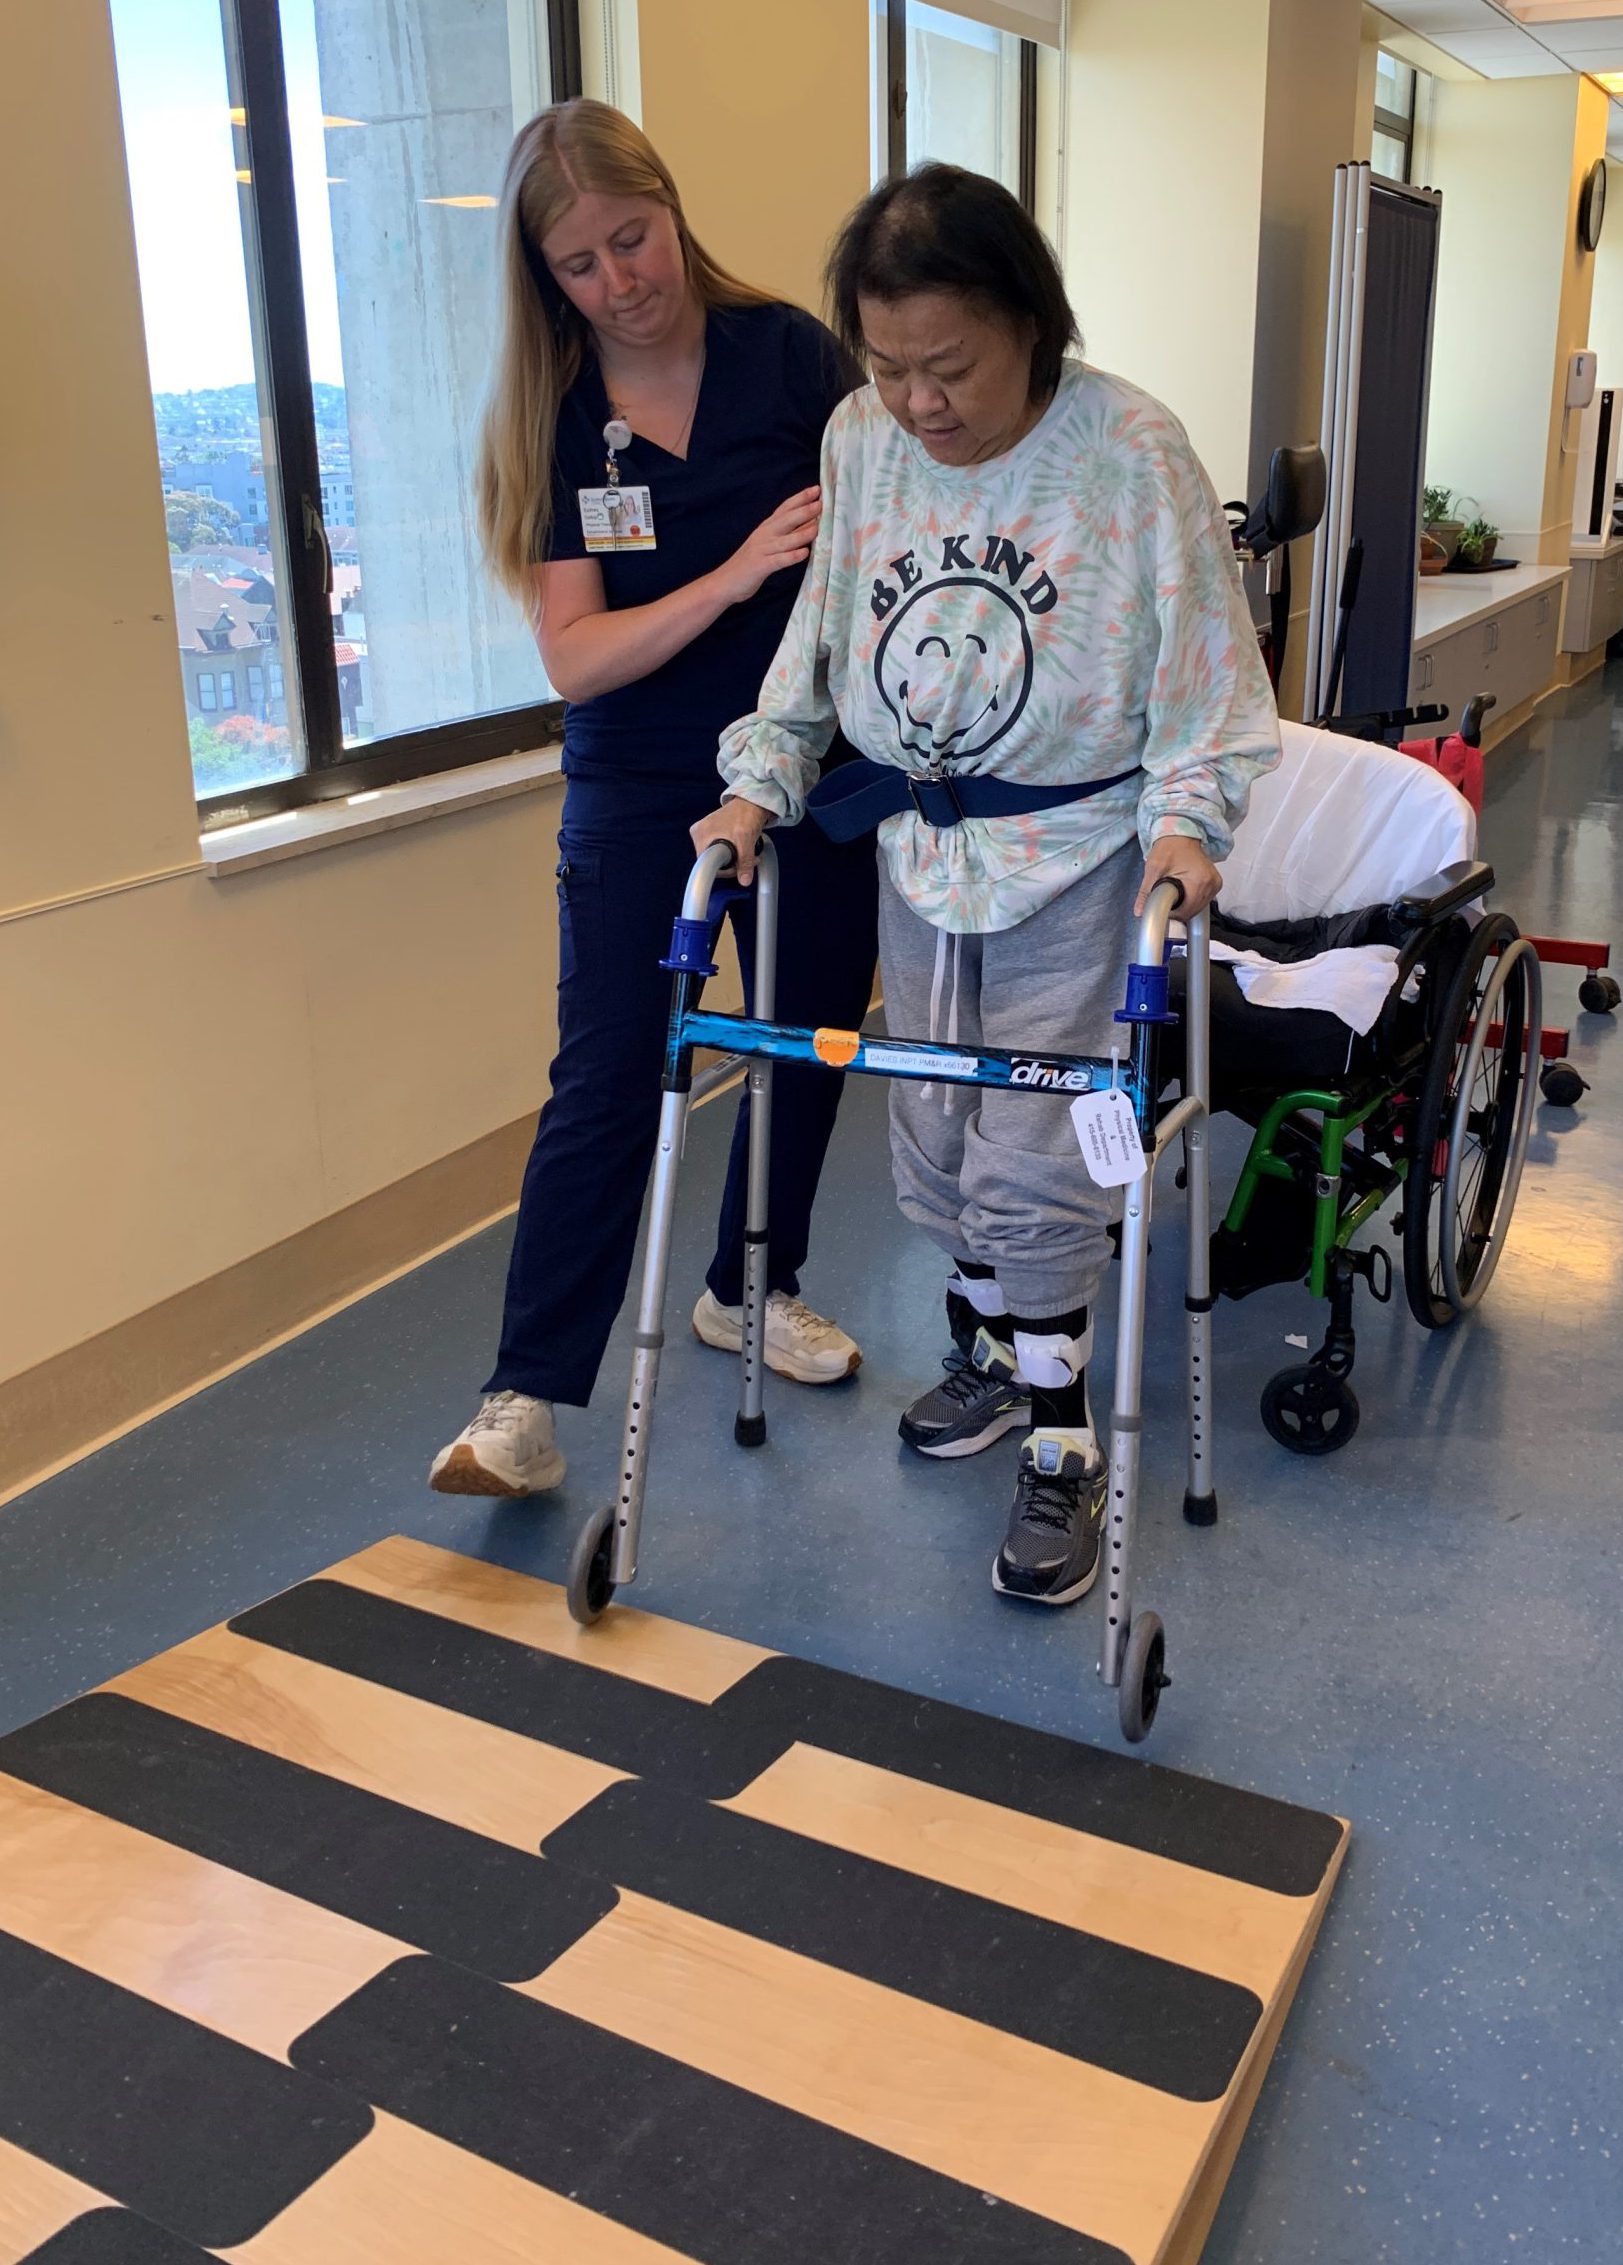 Woman receives help walking from a healthcare worker in a hospital rehabilitation center